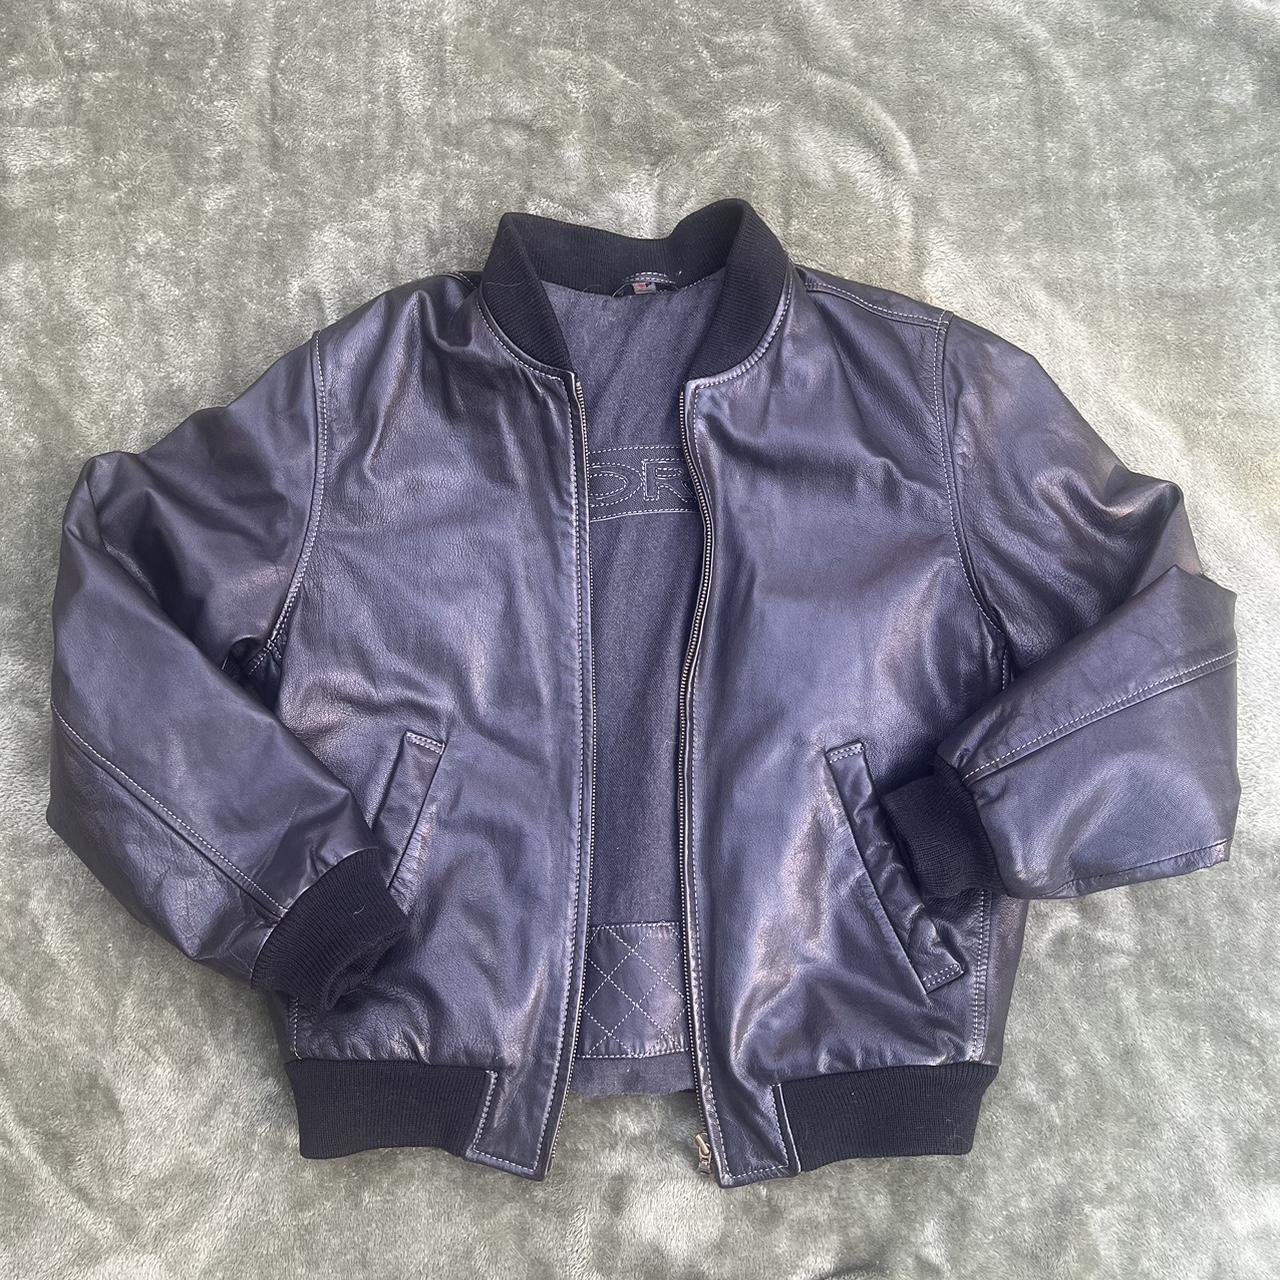 World Faux Leather Bomber Jacket! - This jacket is... - Depop